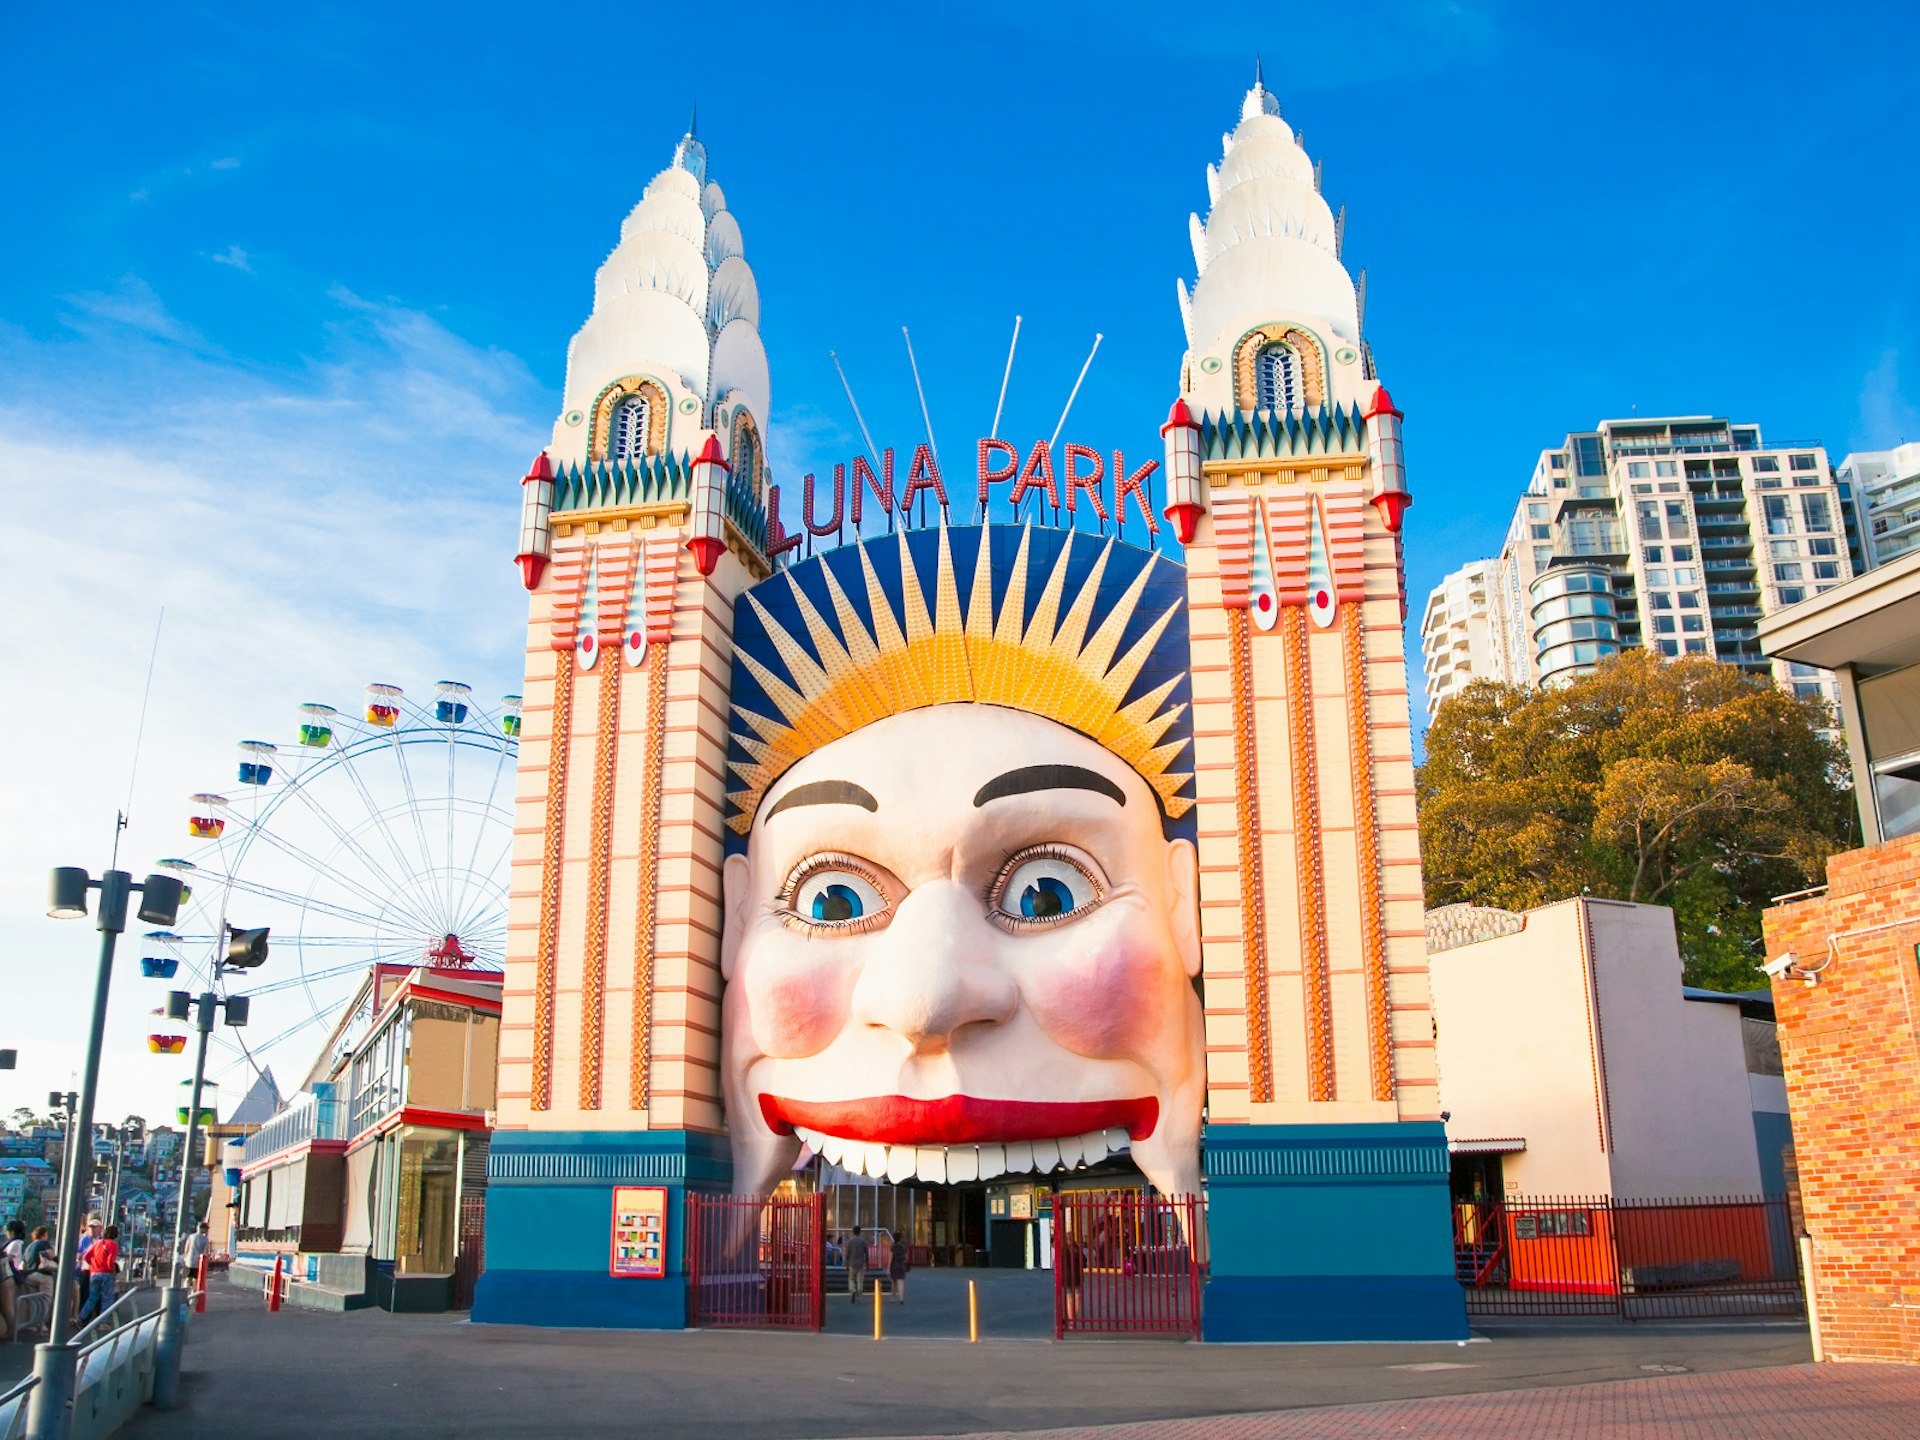 Disney alternatives - Mr Moon, the gatekeeper to a world of adventure at Luna Park. A huge pale face framed by skyscrapers is the entrance to Luna Park - with visitors entering through its mouth 